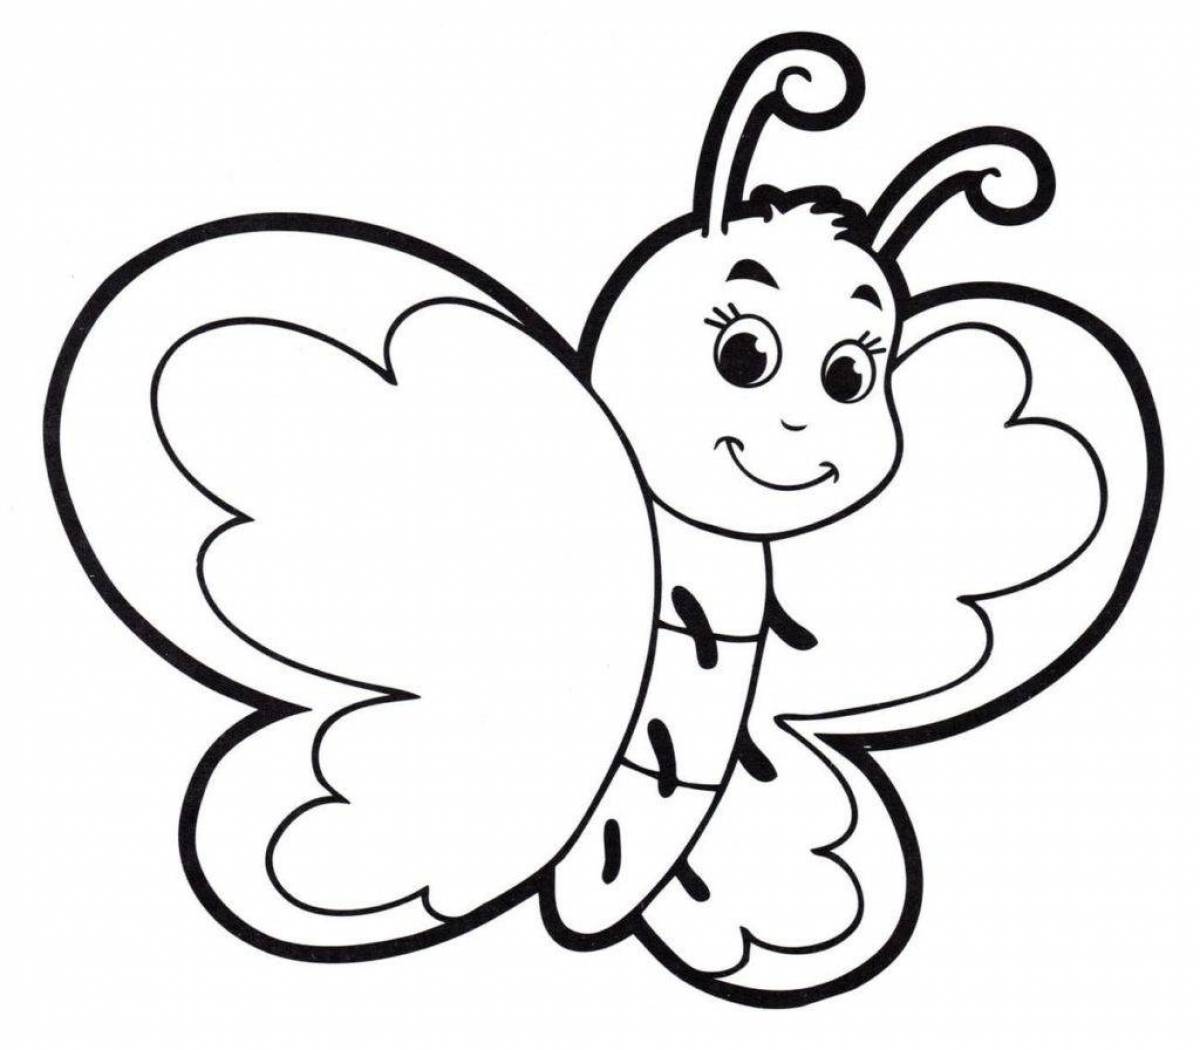 Adorable butterfly coloring book for 3-4 year olds